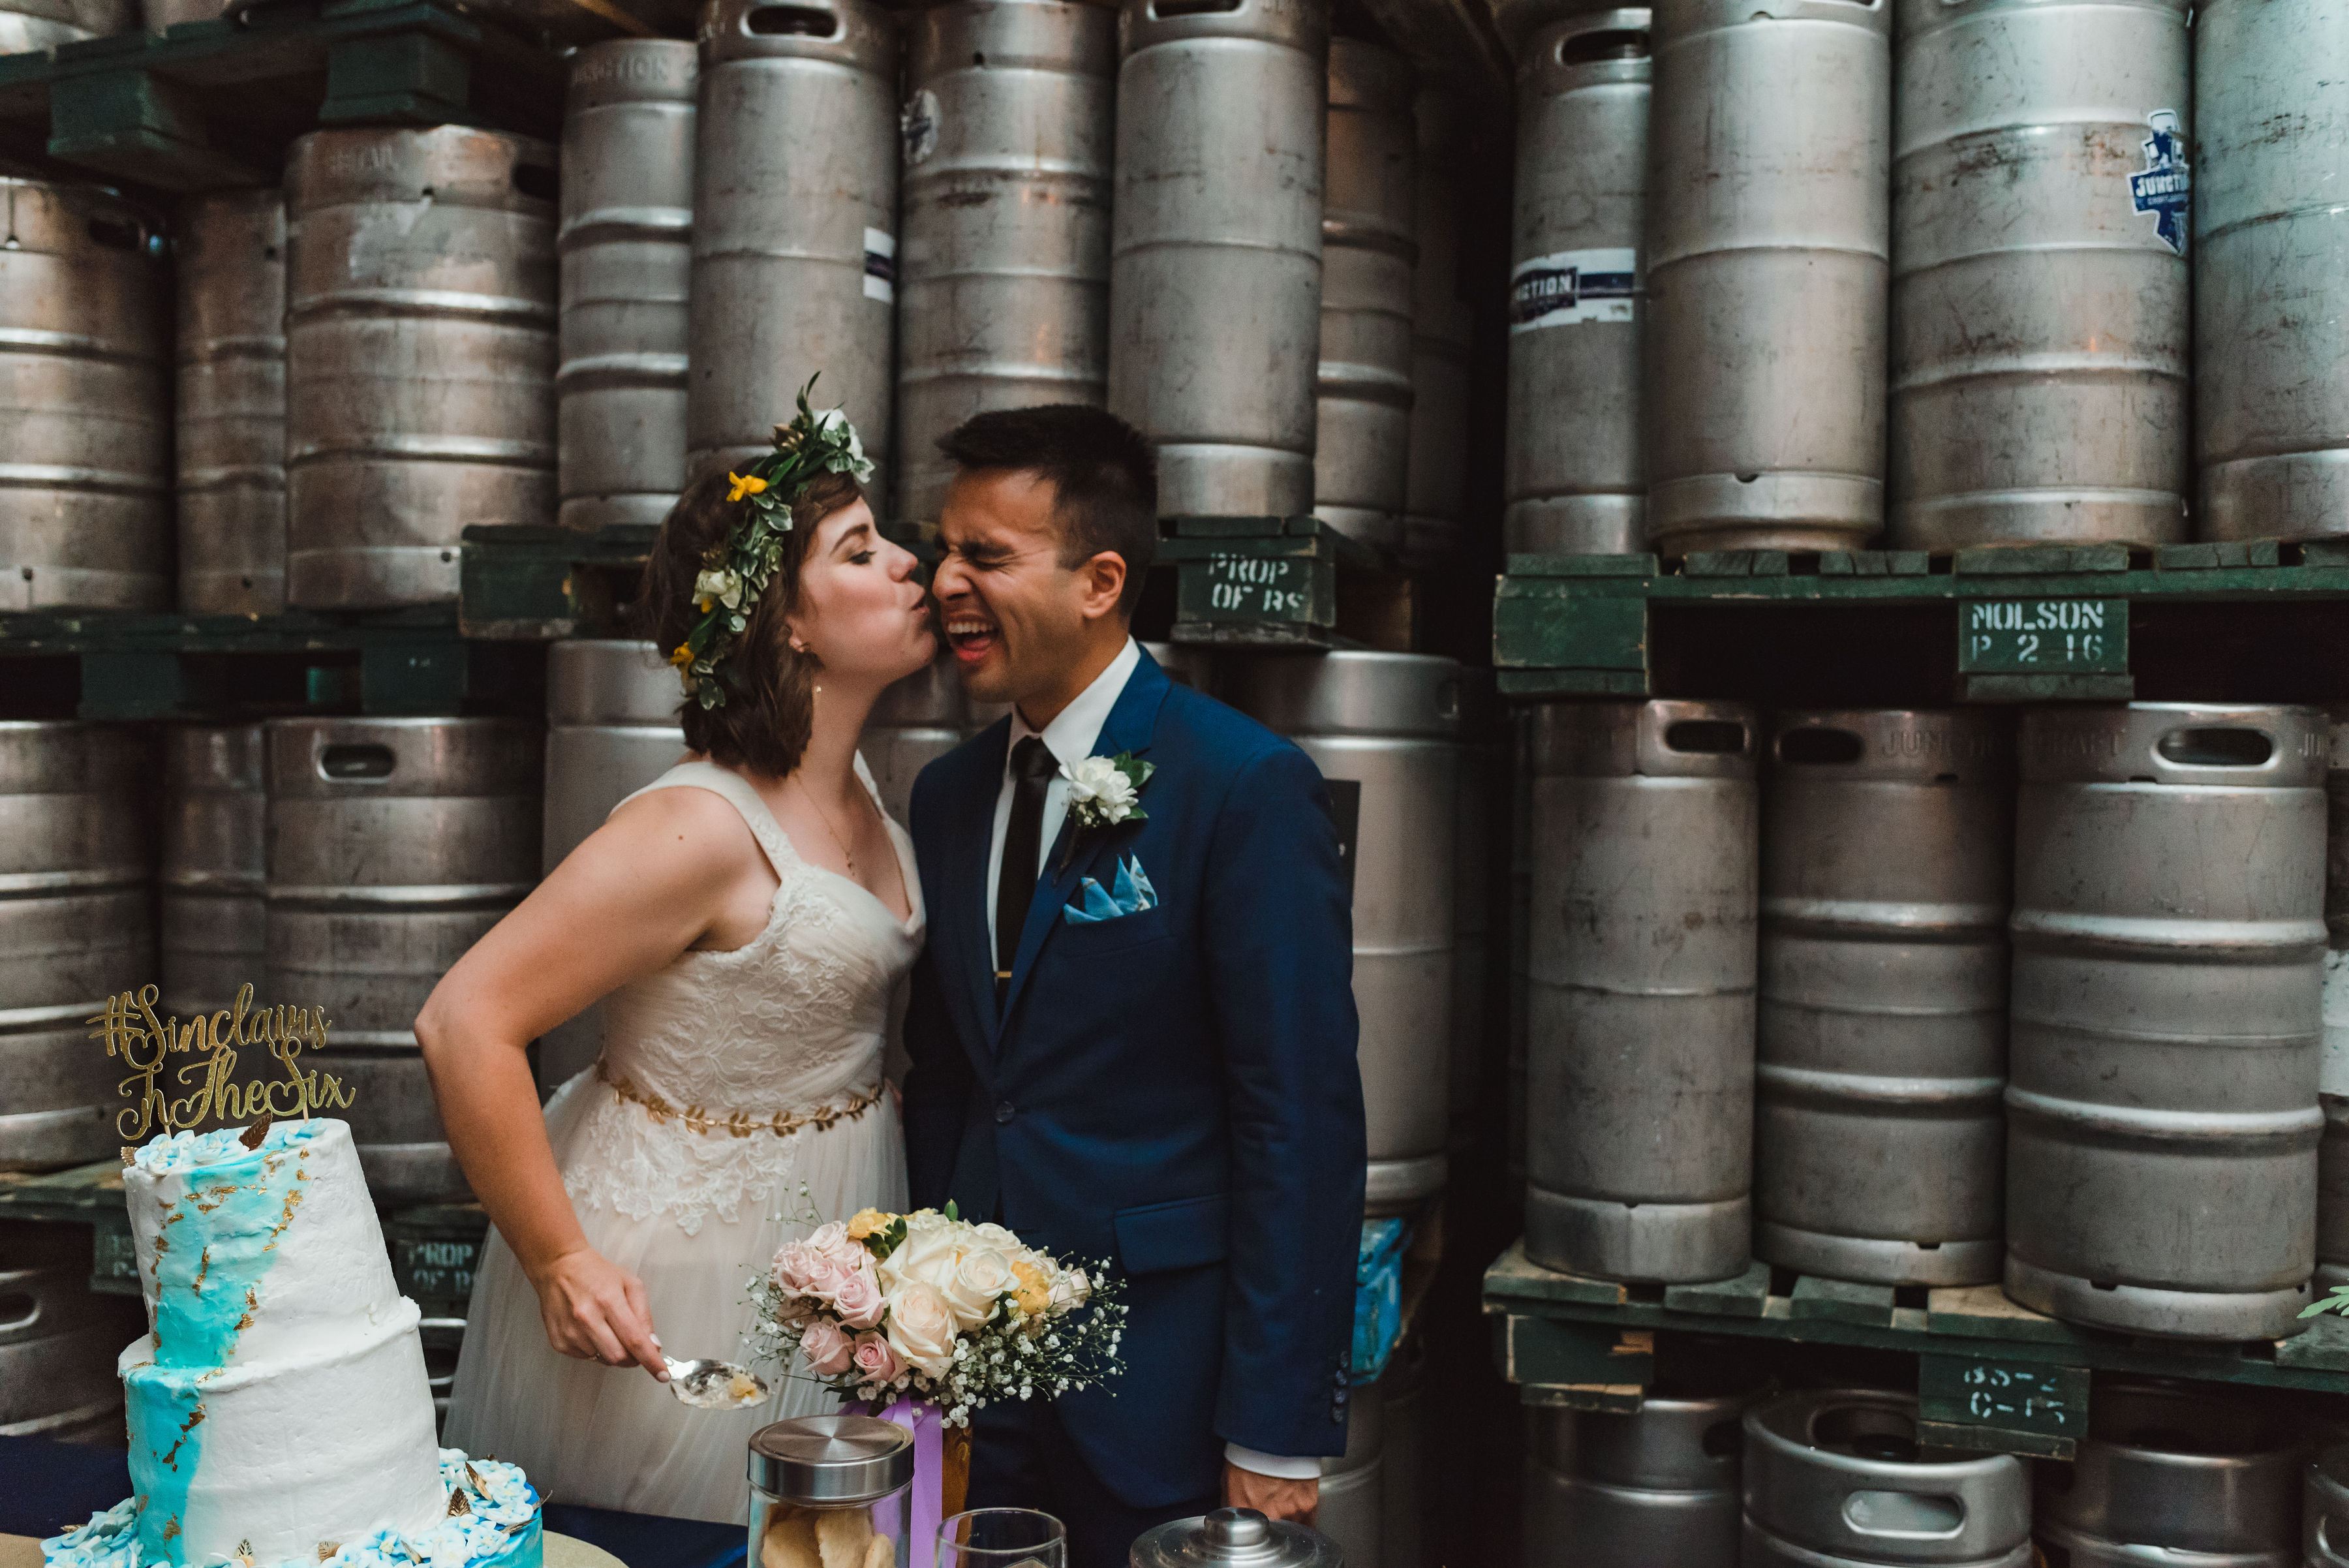 bride kissing groom on his cheek while she cuts the wedding cake with kegs of beer stacked behind them Junction Craft Brewing wedding photography